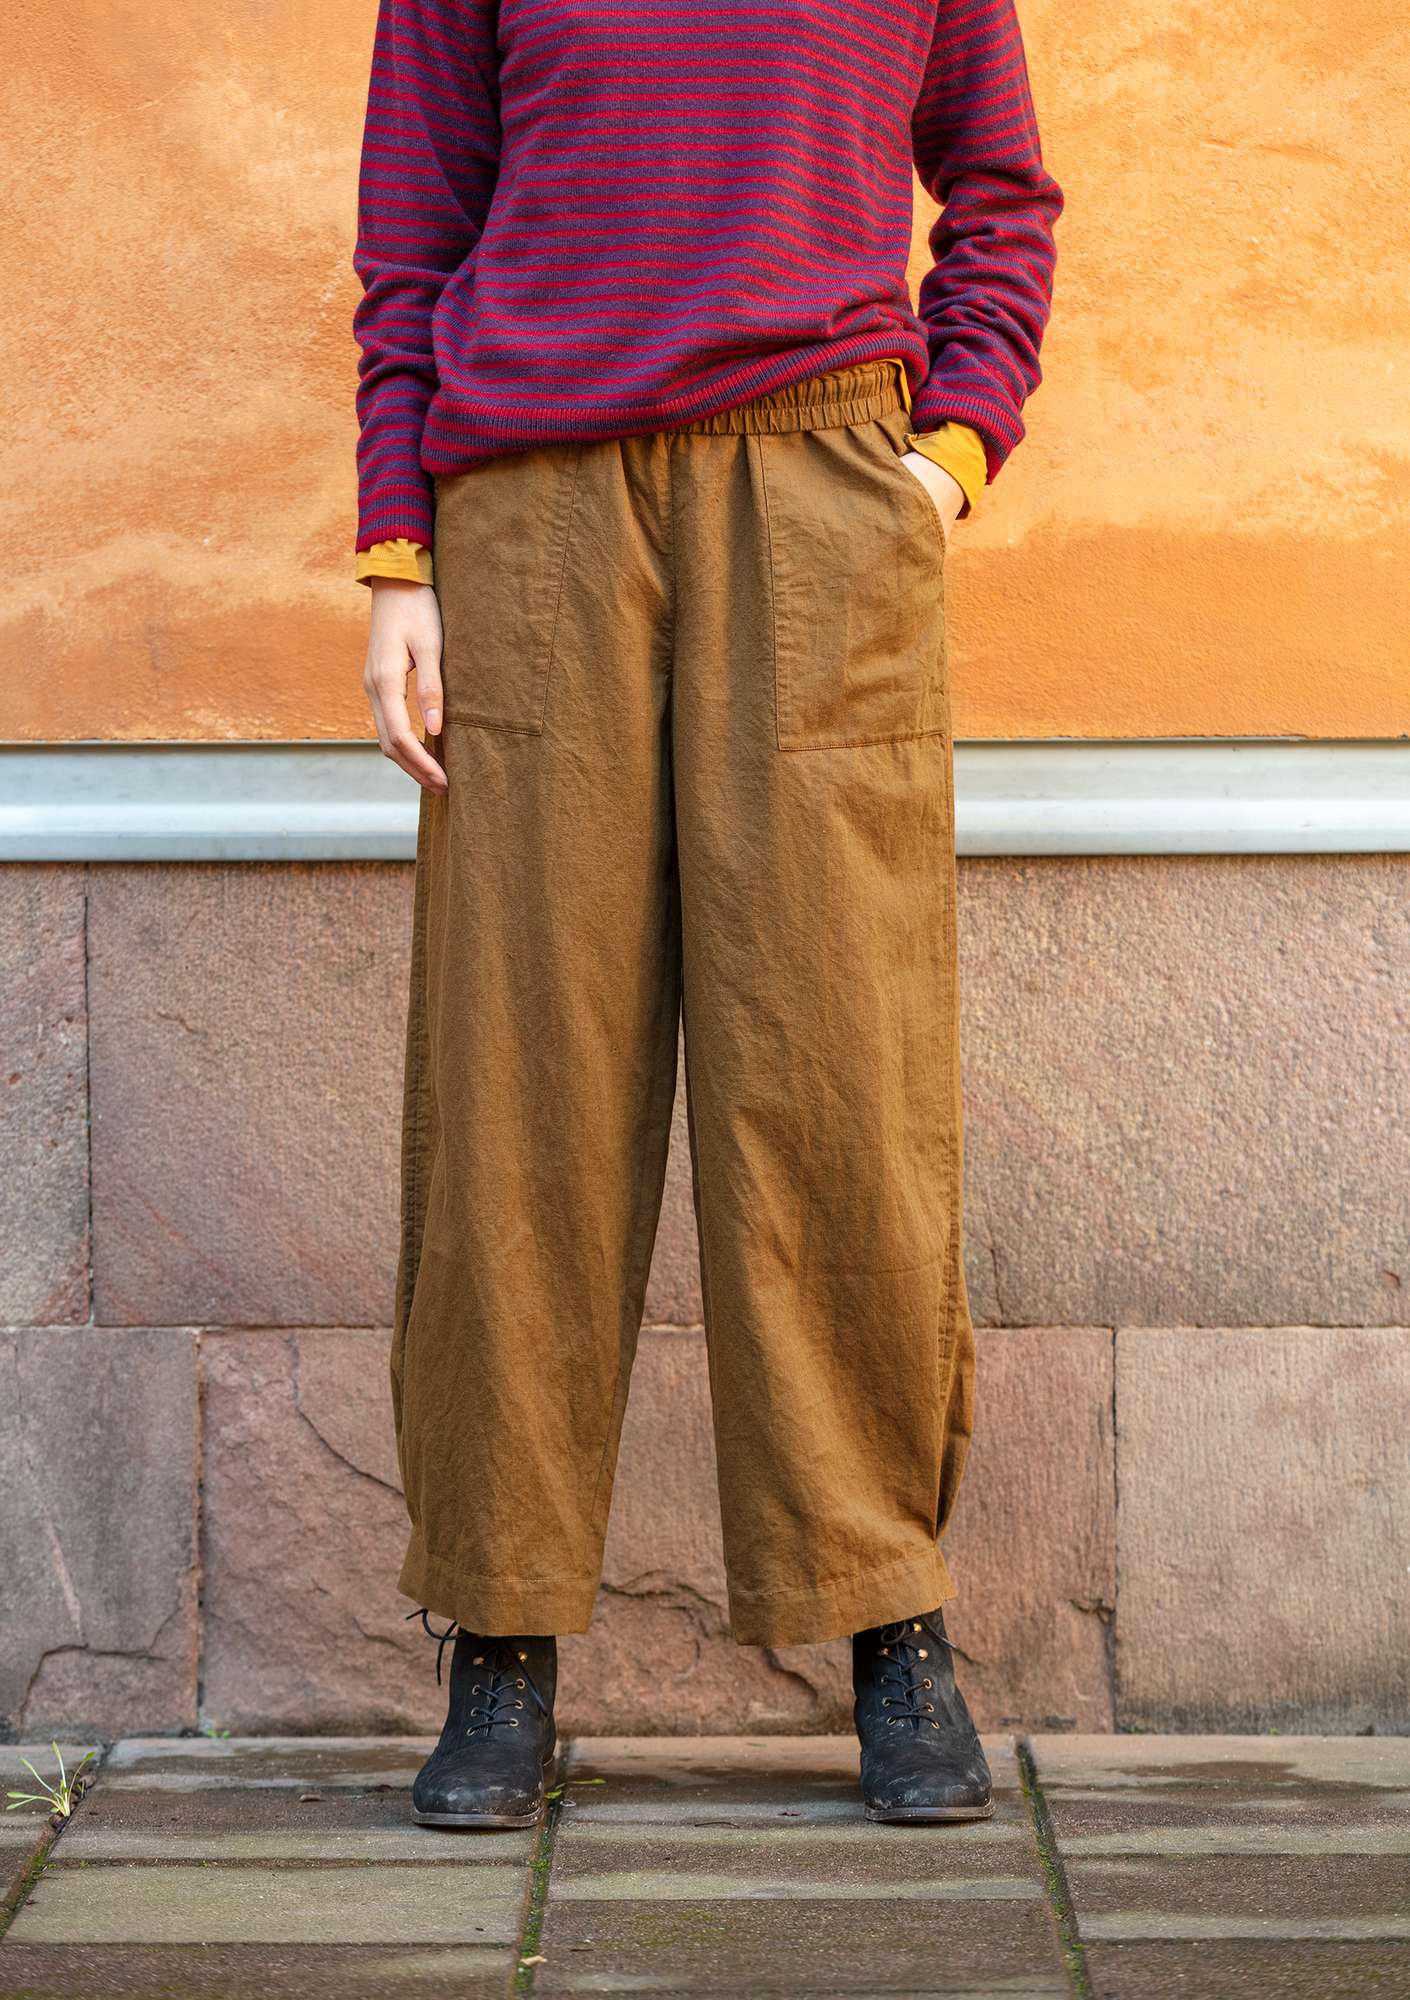 Solid-colored pants brass